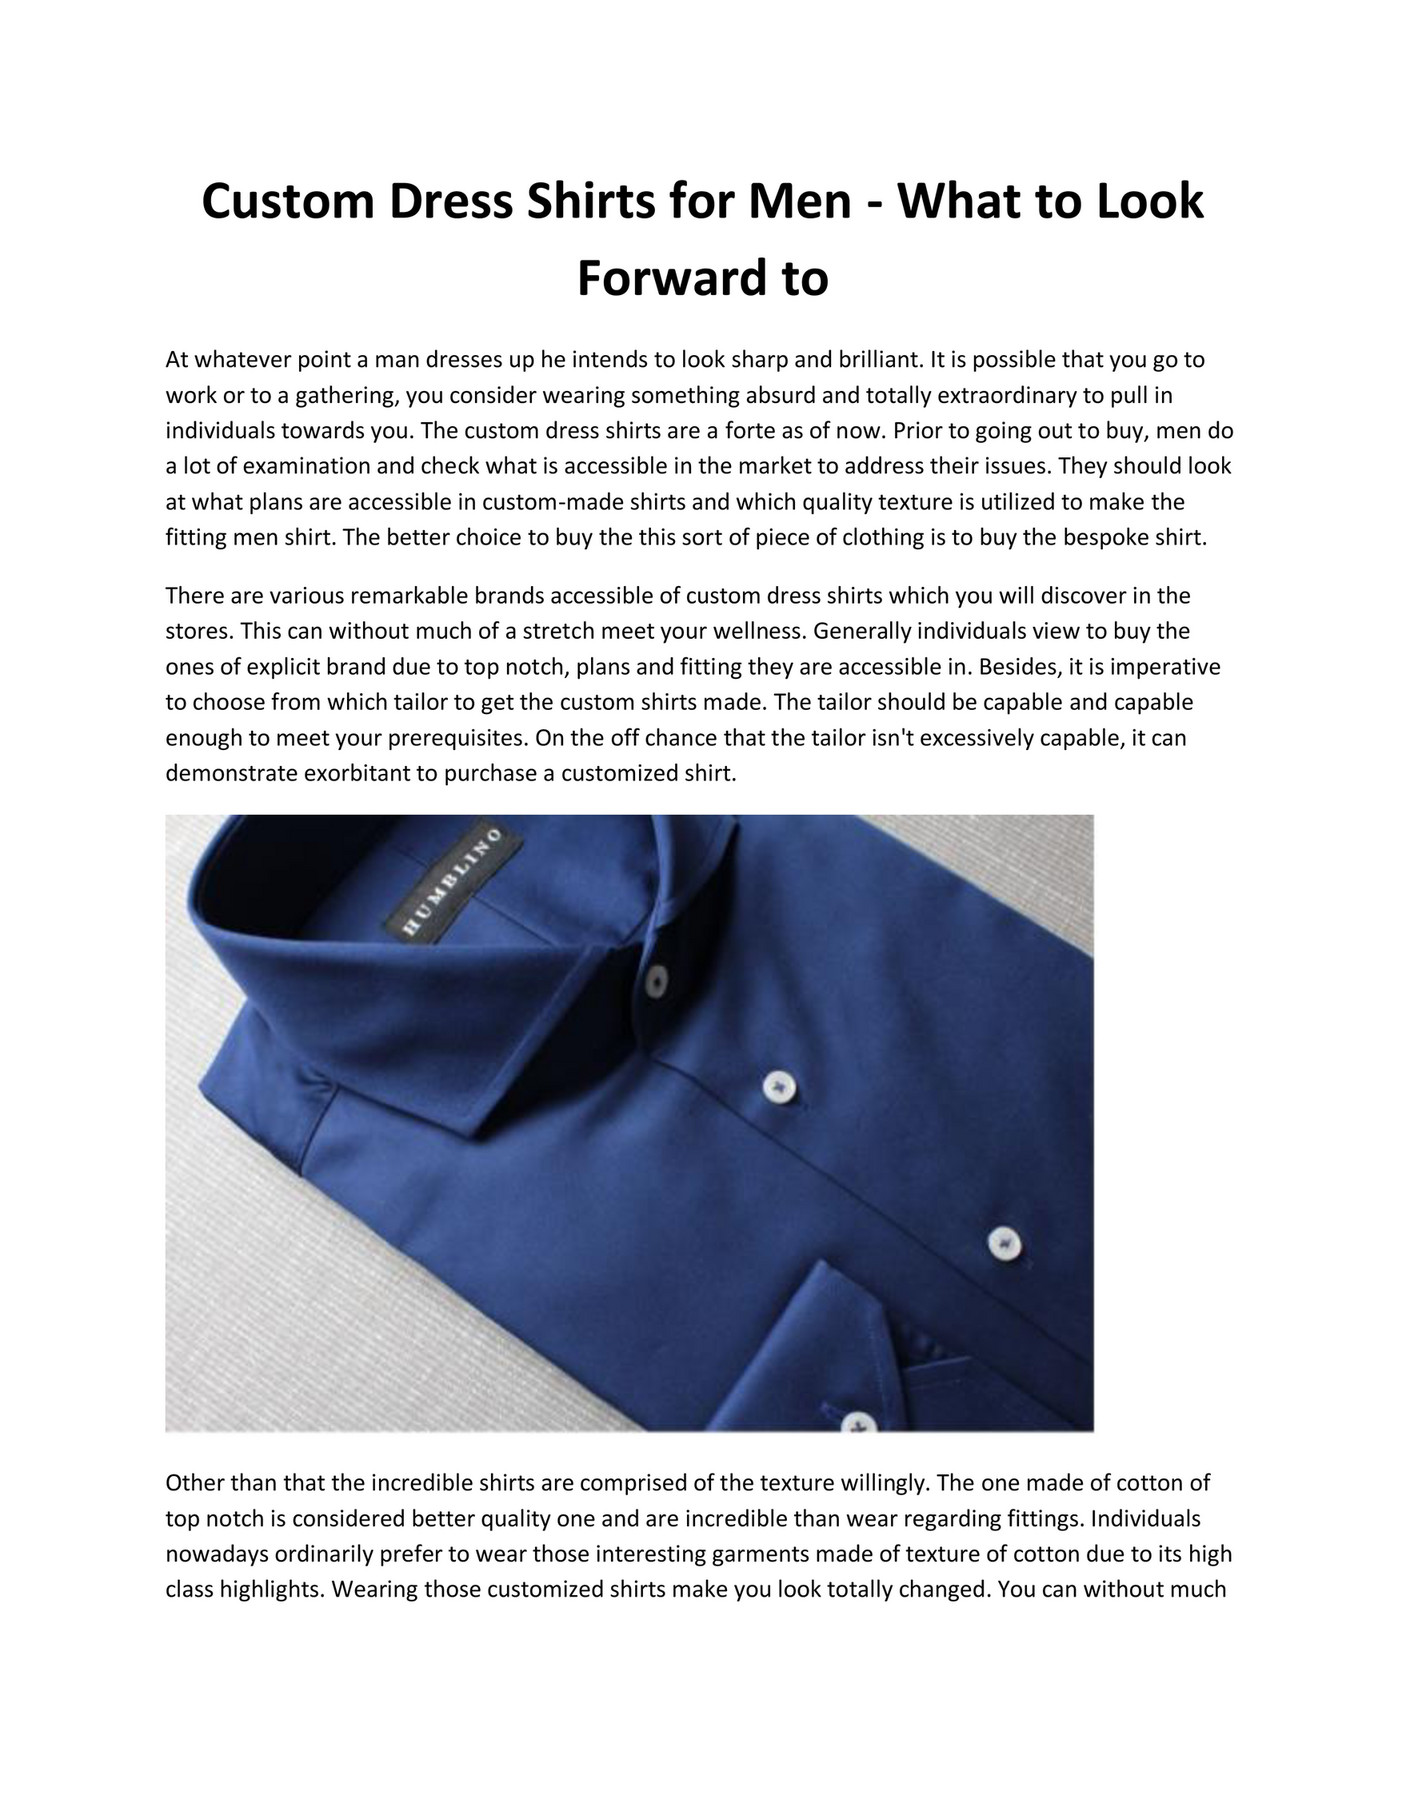 cam heating - Custom Dress Shirts for Men - What to Look Forward to ...